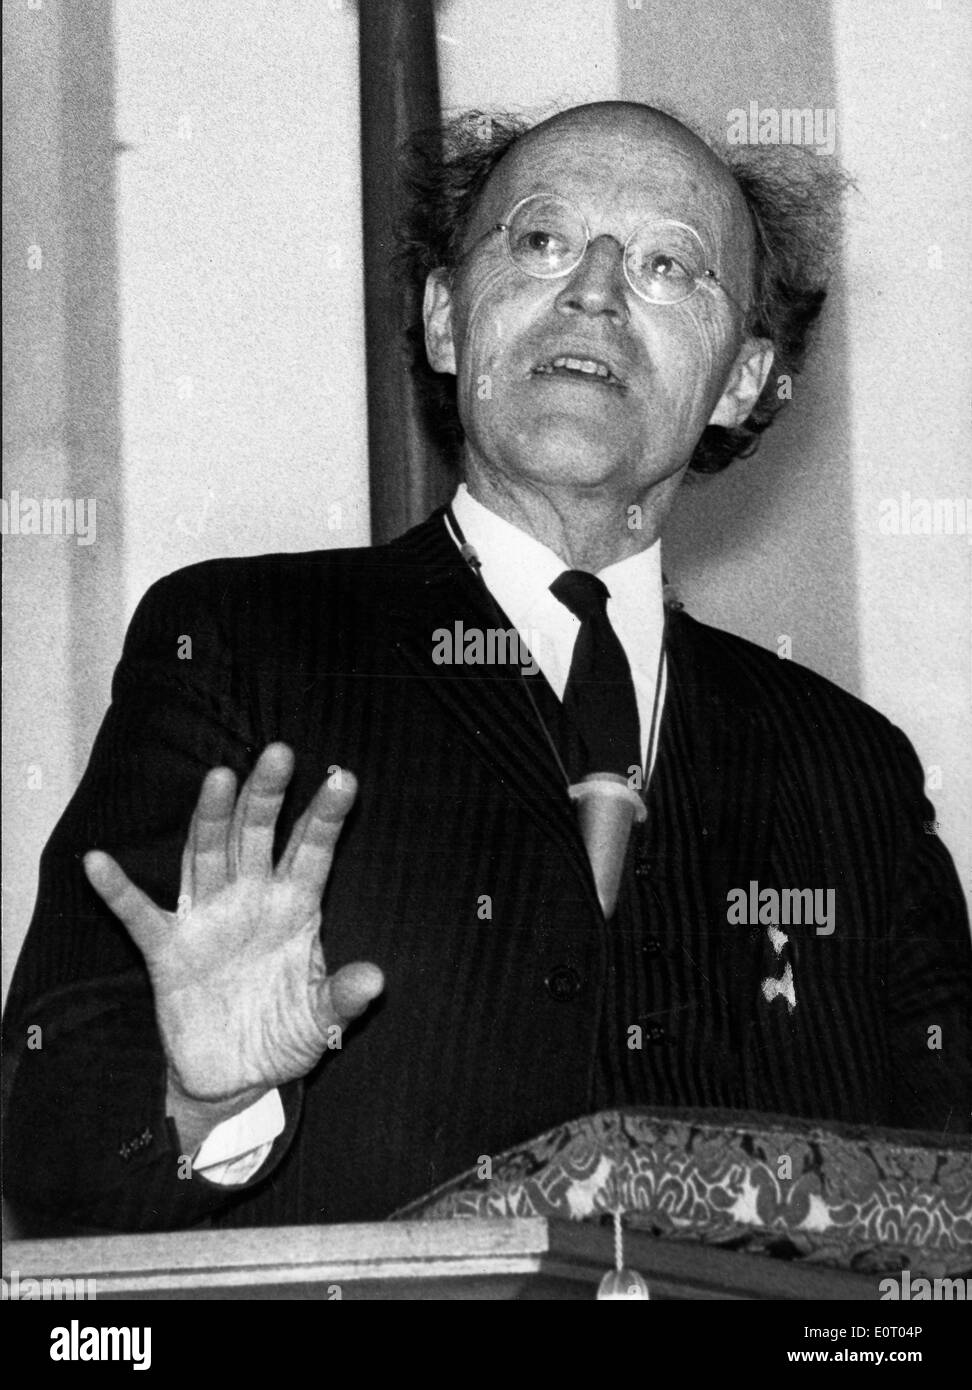 The 7th Earl of Longford speaking at a press conference Stock Photo